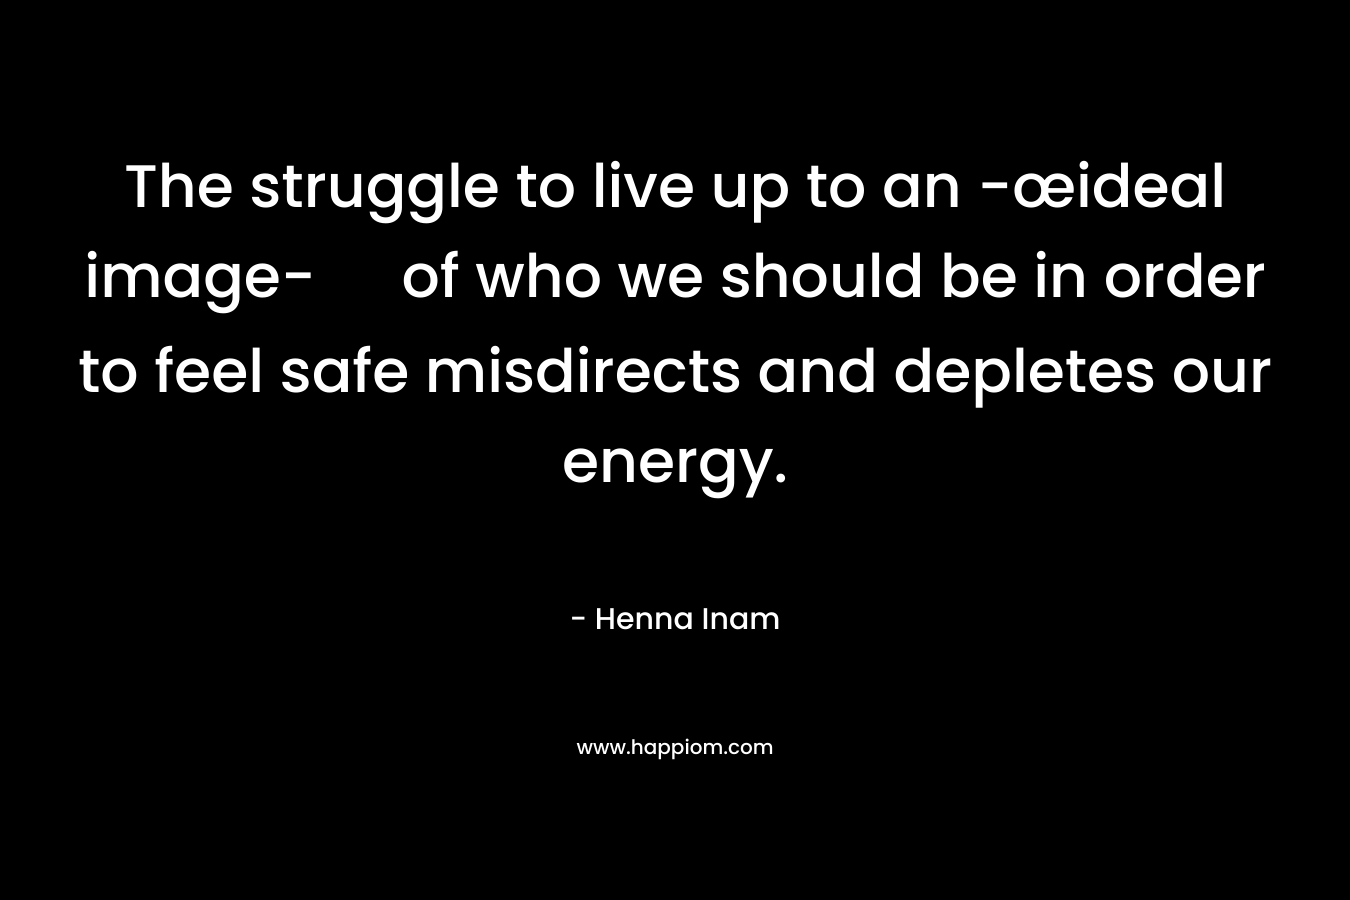 The struggle to live up to an -œideal image- of who we should be in order to feel safe misdirects and depletes our energy. – Henna Inam